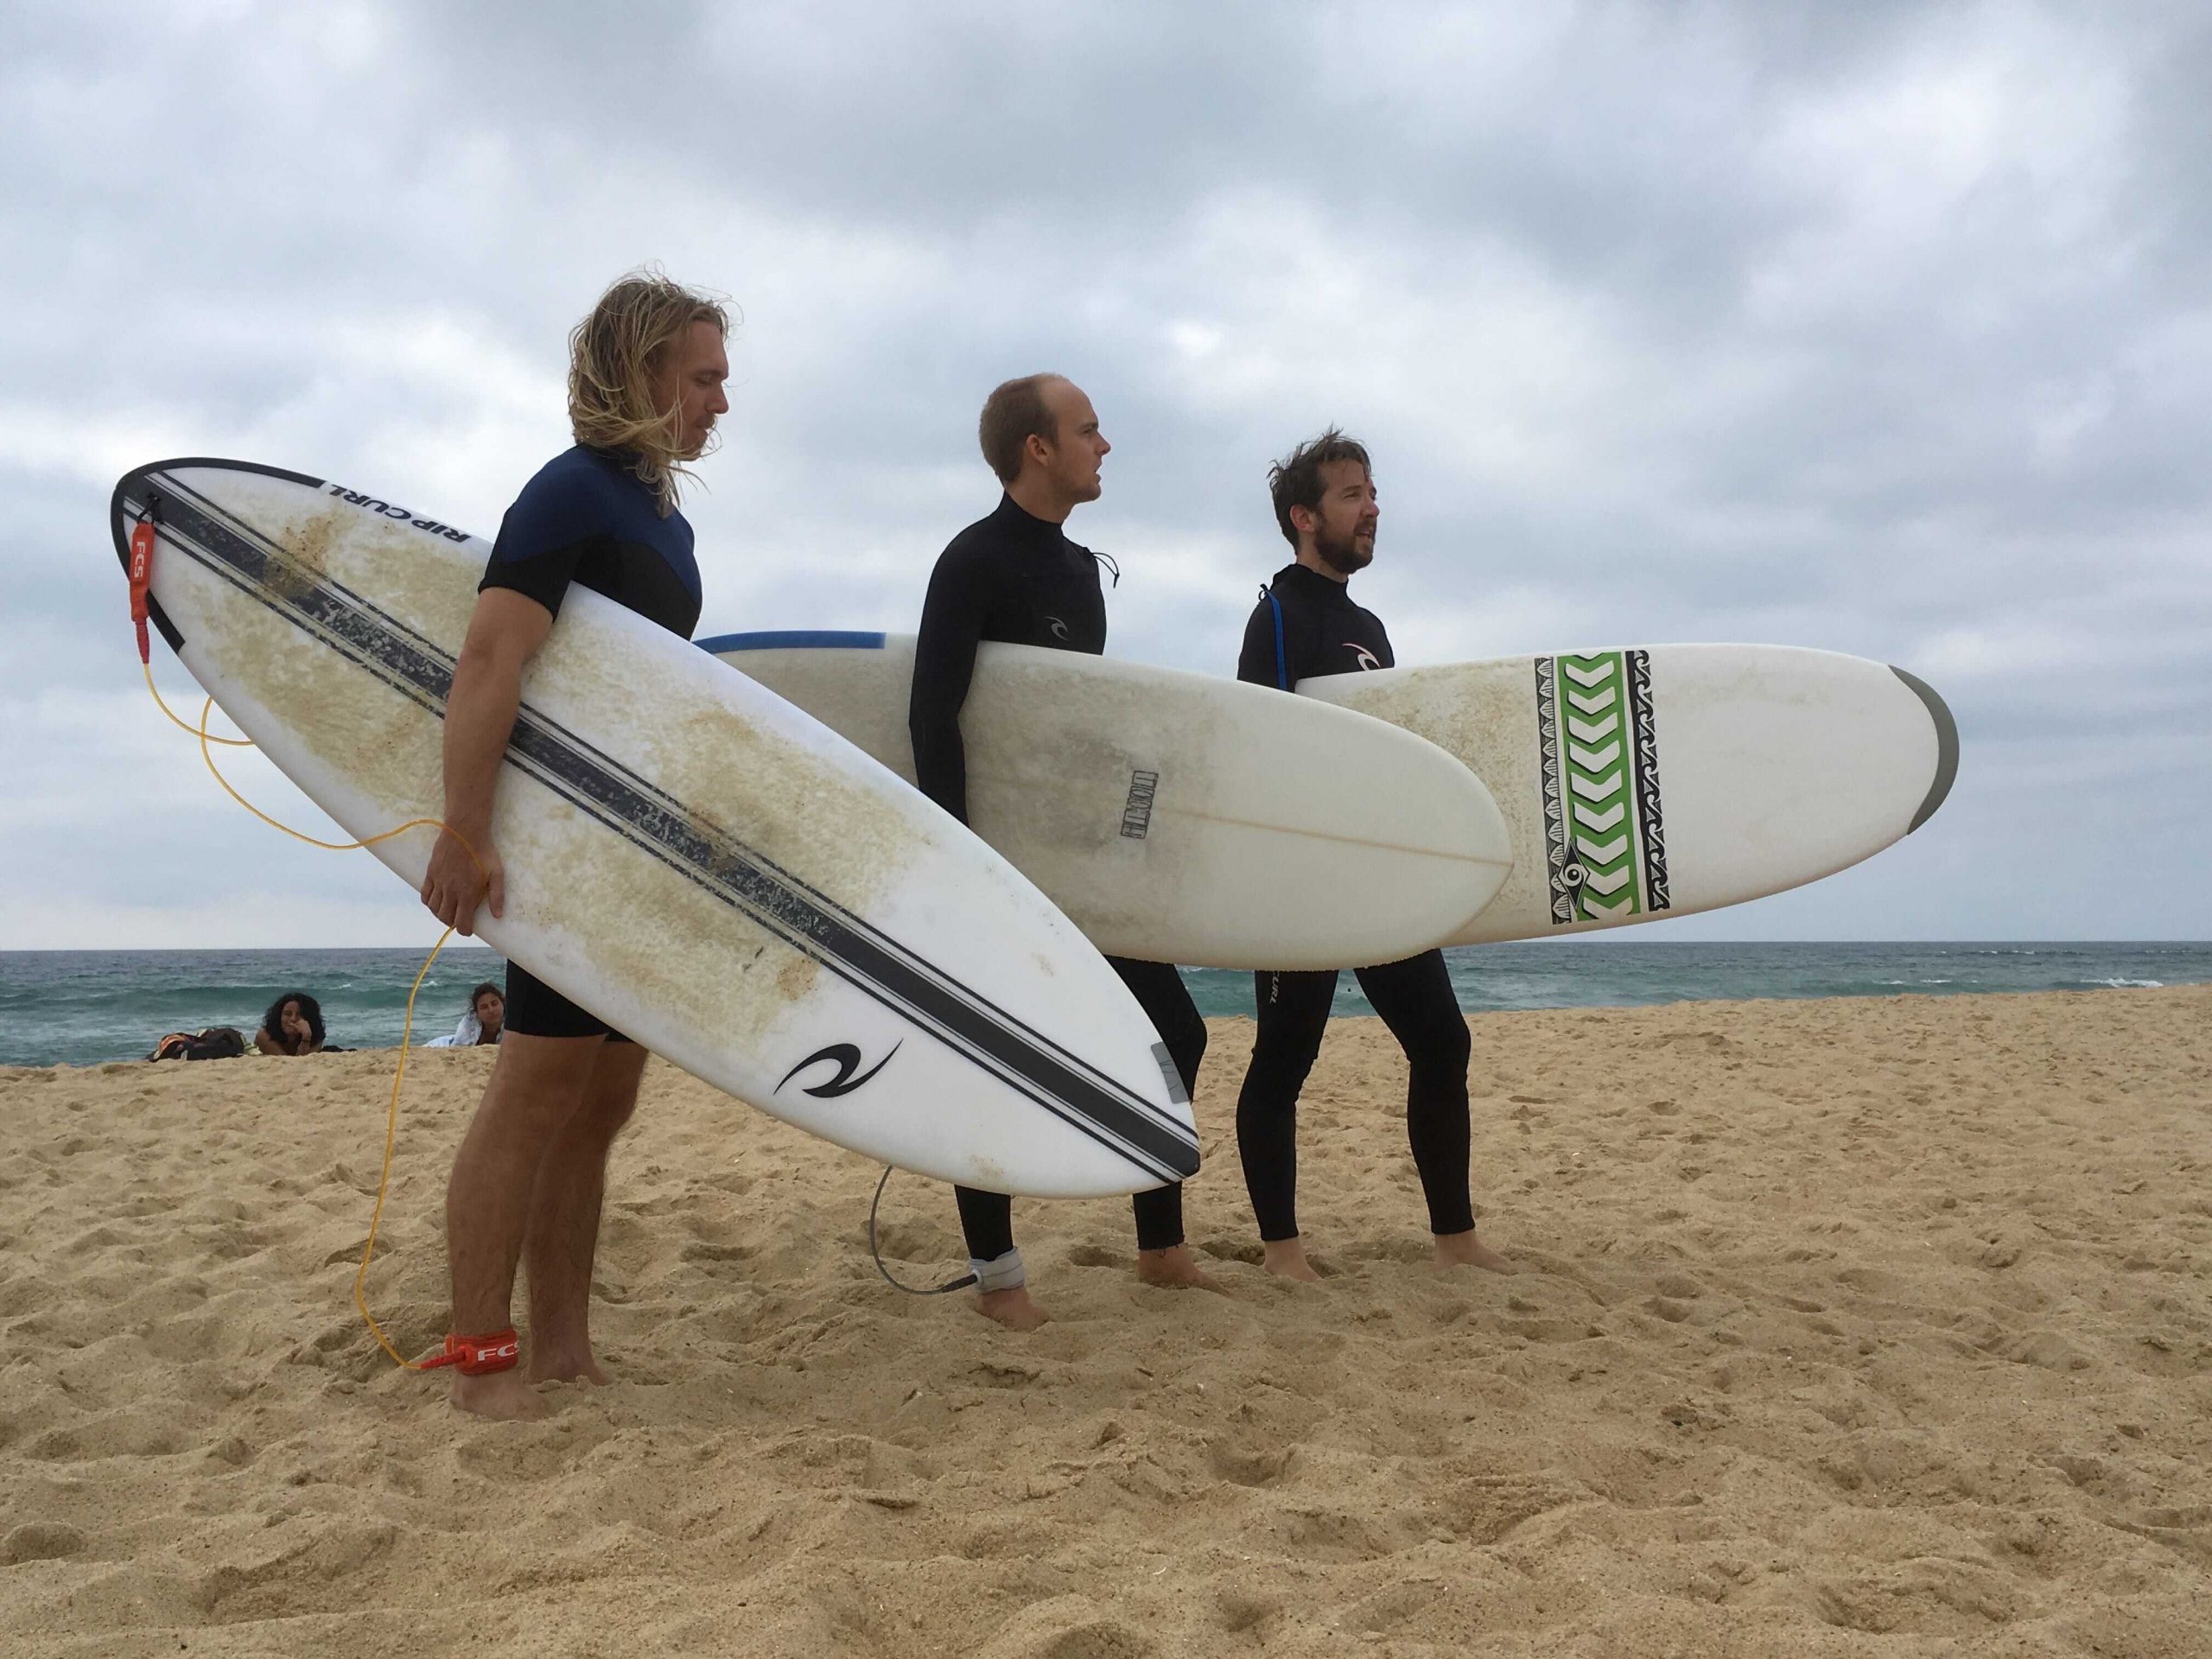 SuperRare founders standing on a beach holding surfboards